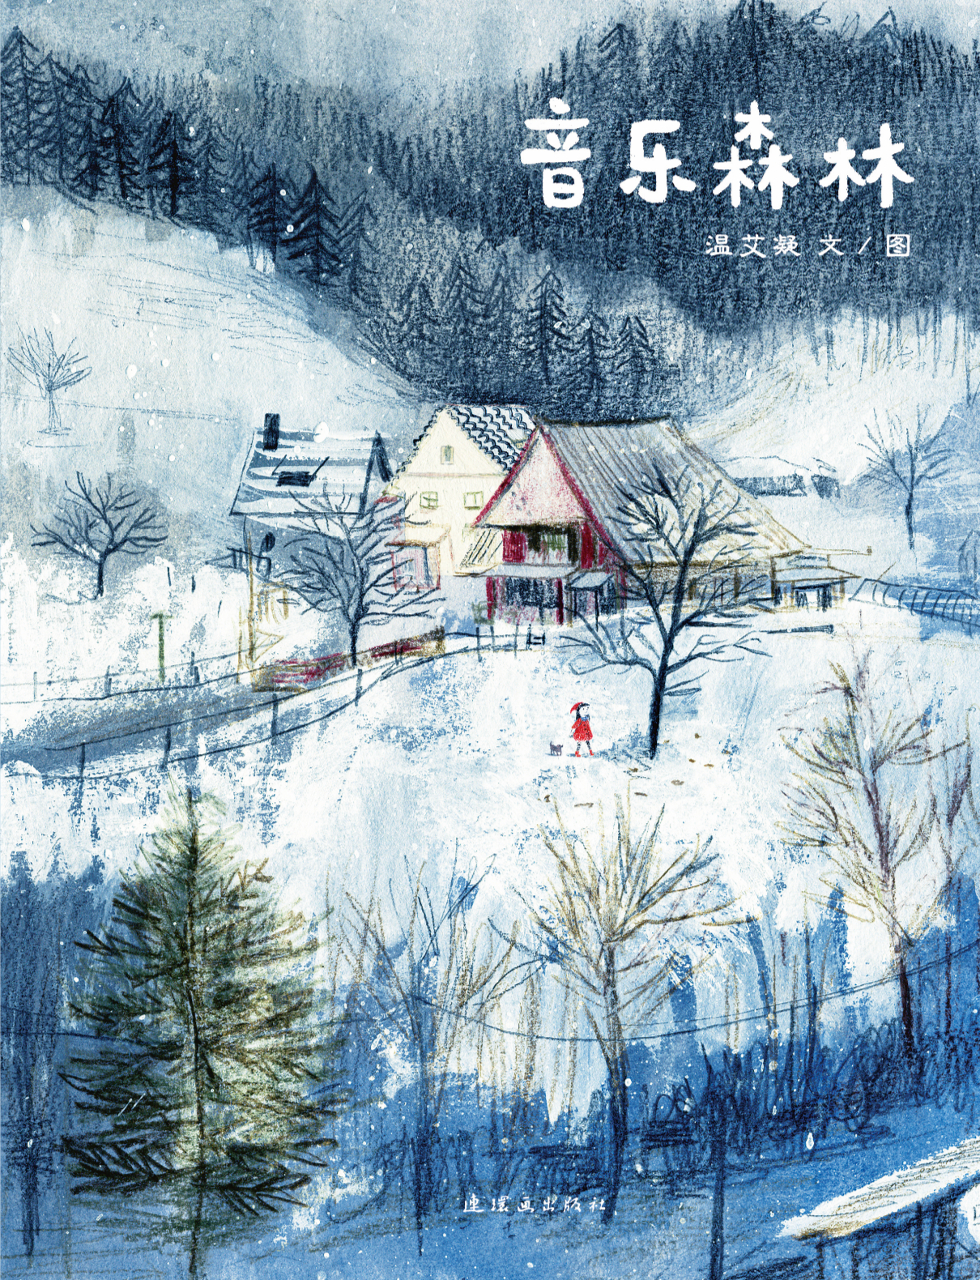 Illustration of chalet in snowy mountains